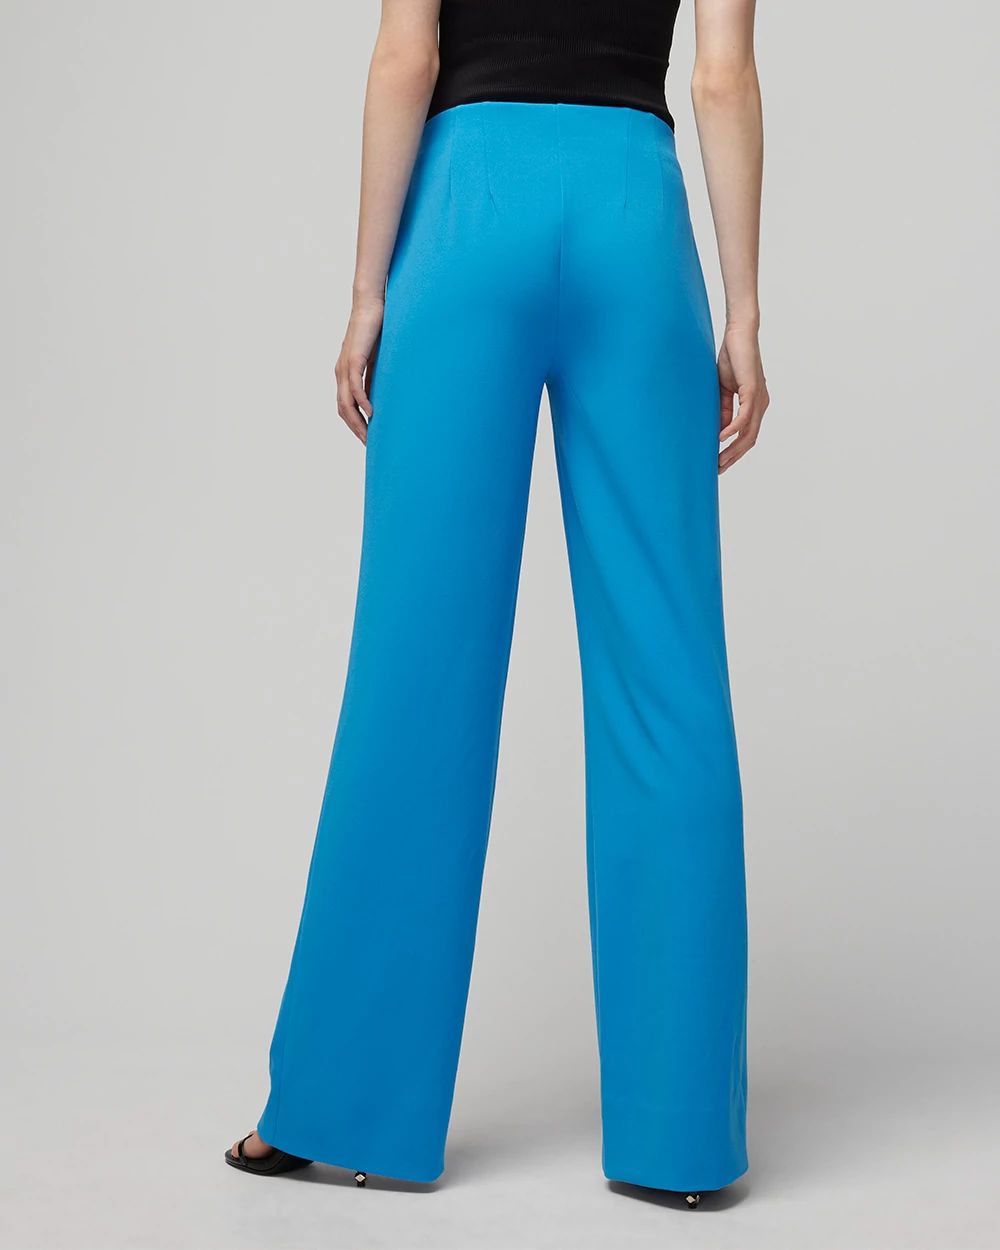 WHBM® Slip On Wide Leg Pant click to view larger image.